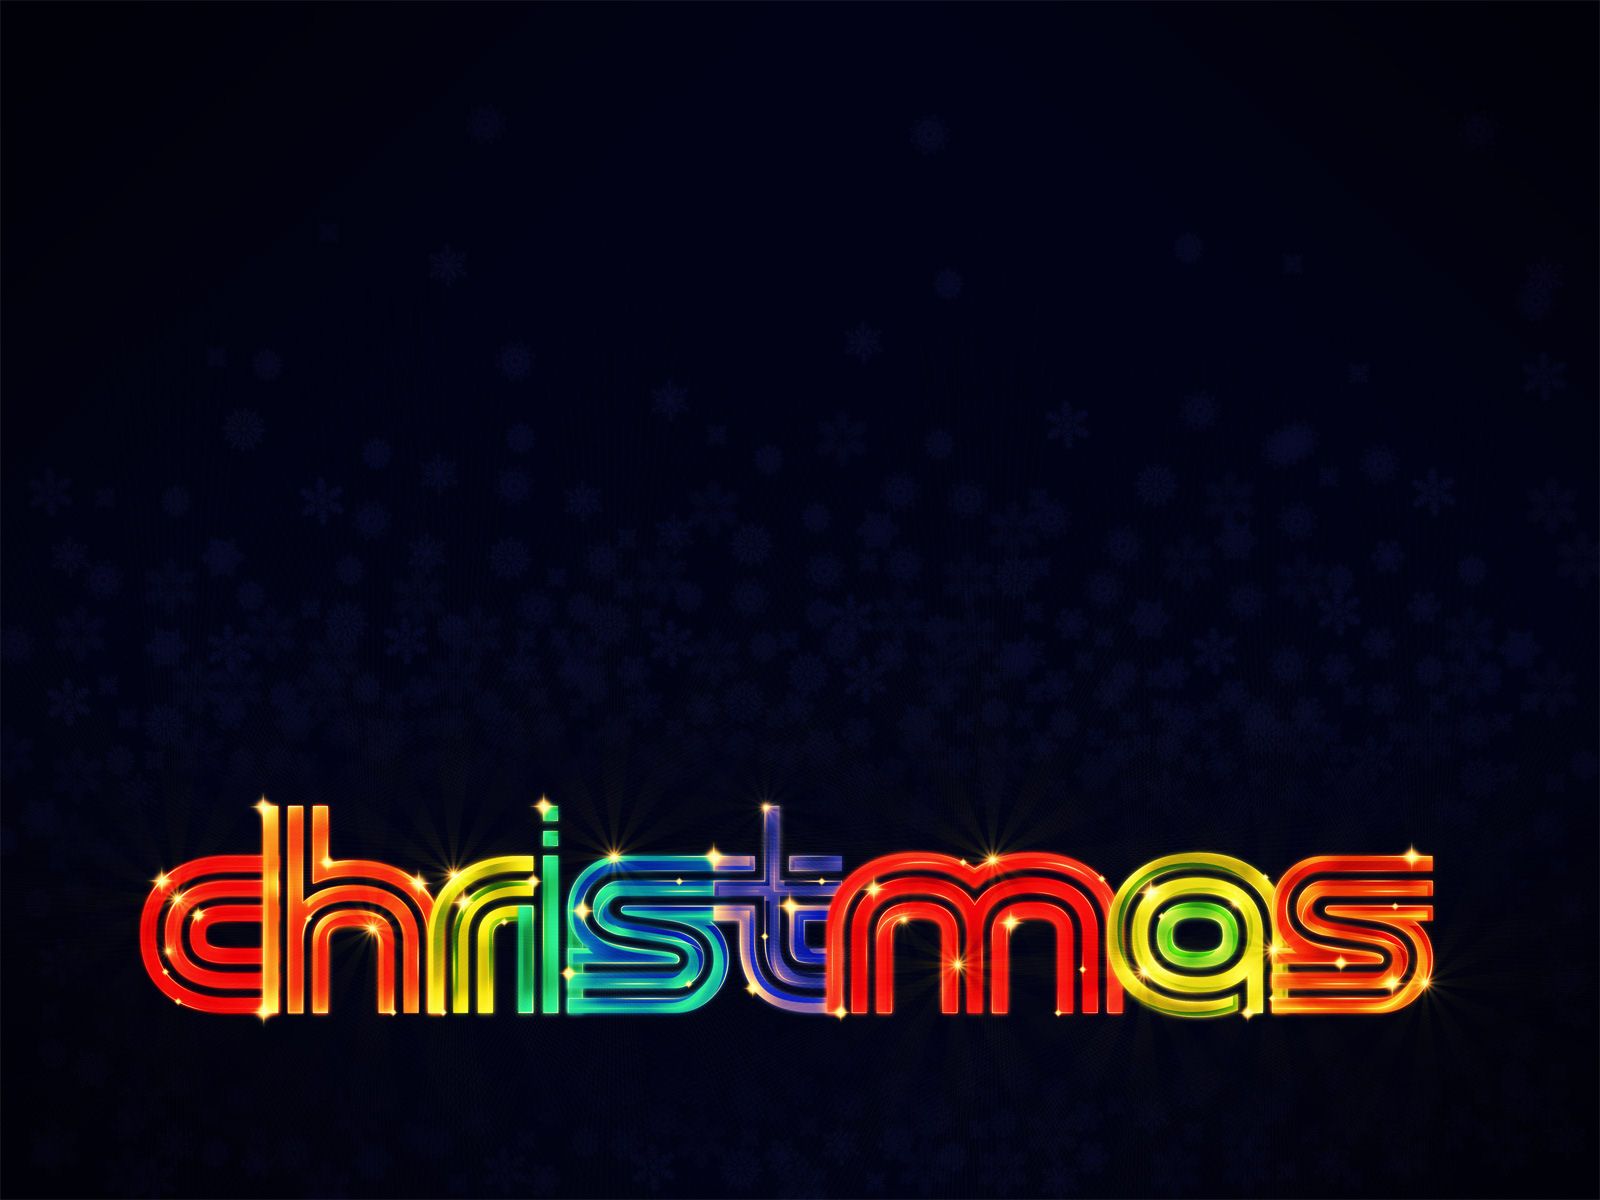 Stylish Merry Christmas Wallpaper and Background For Desktop